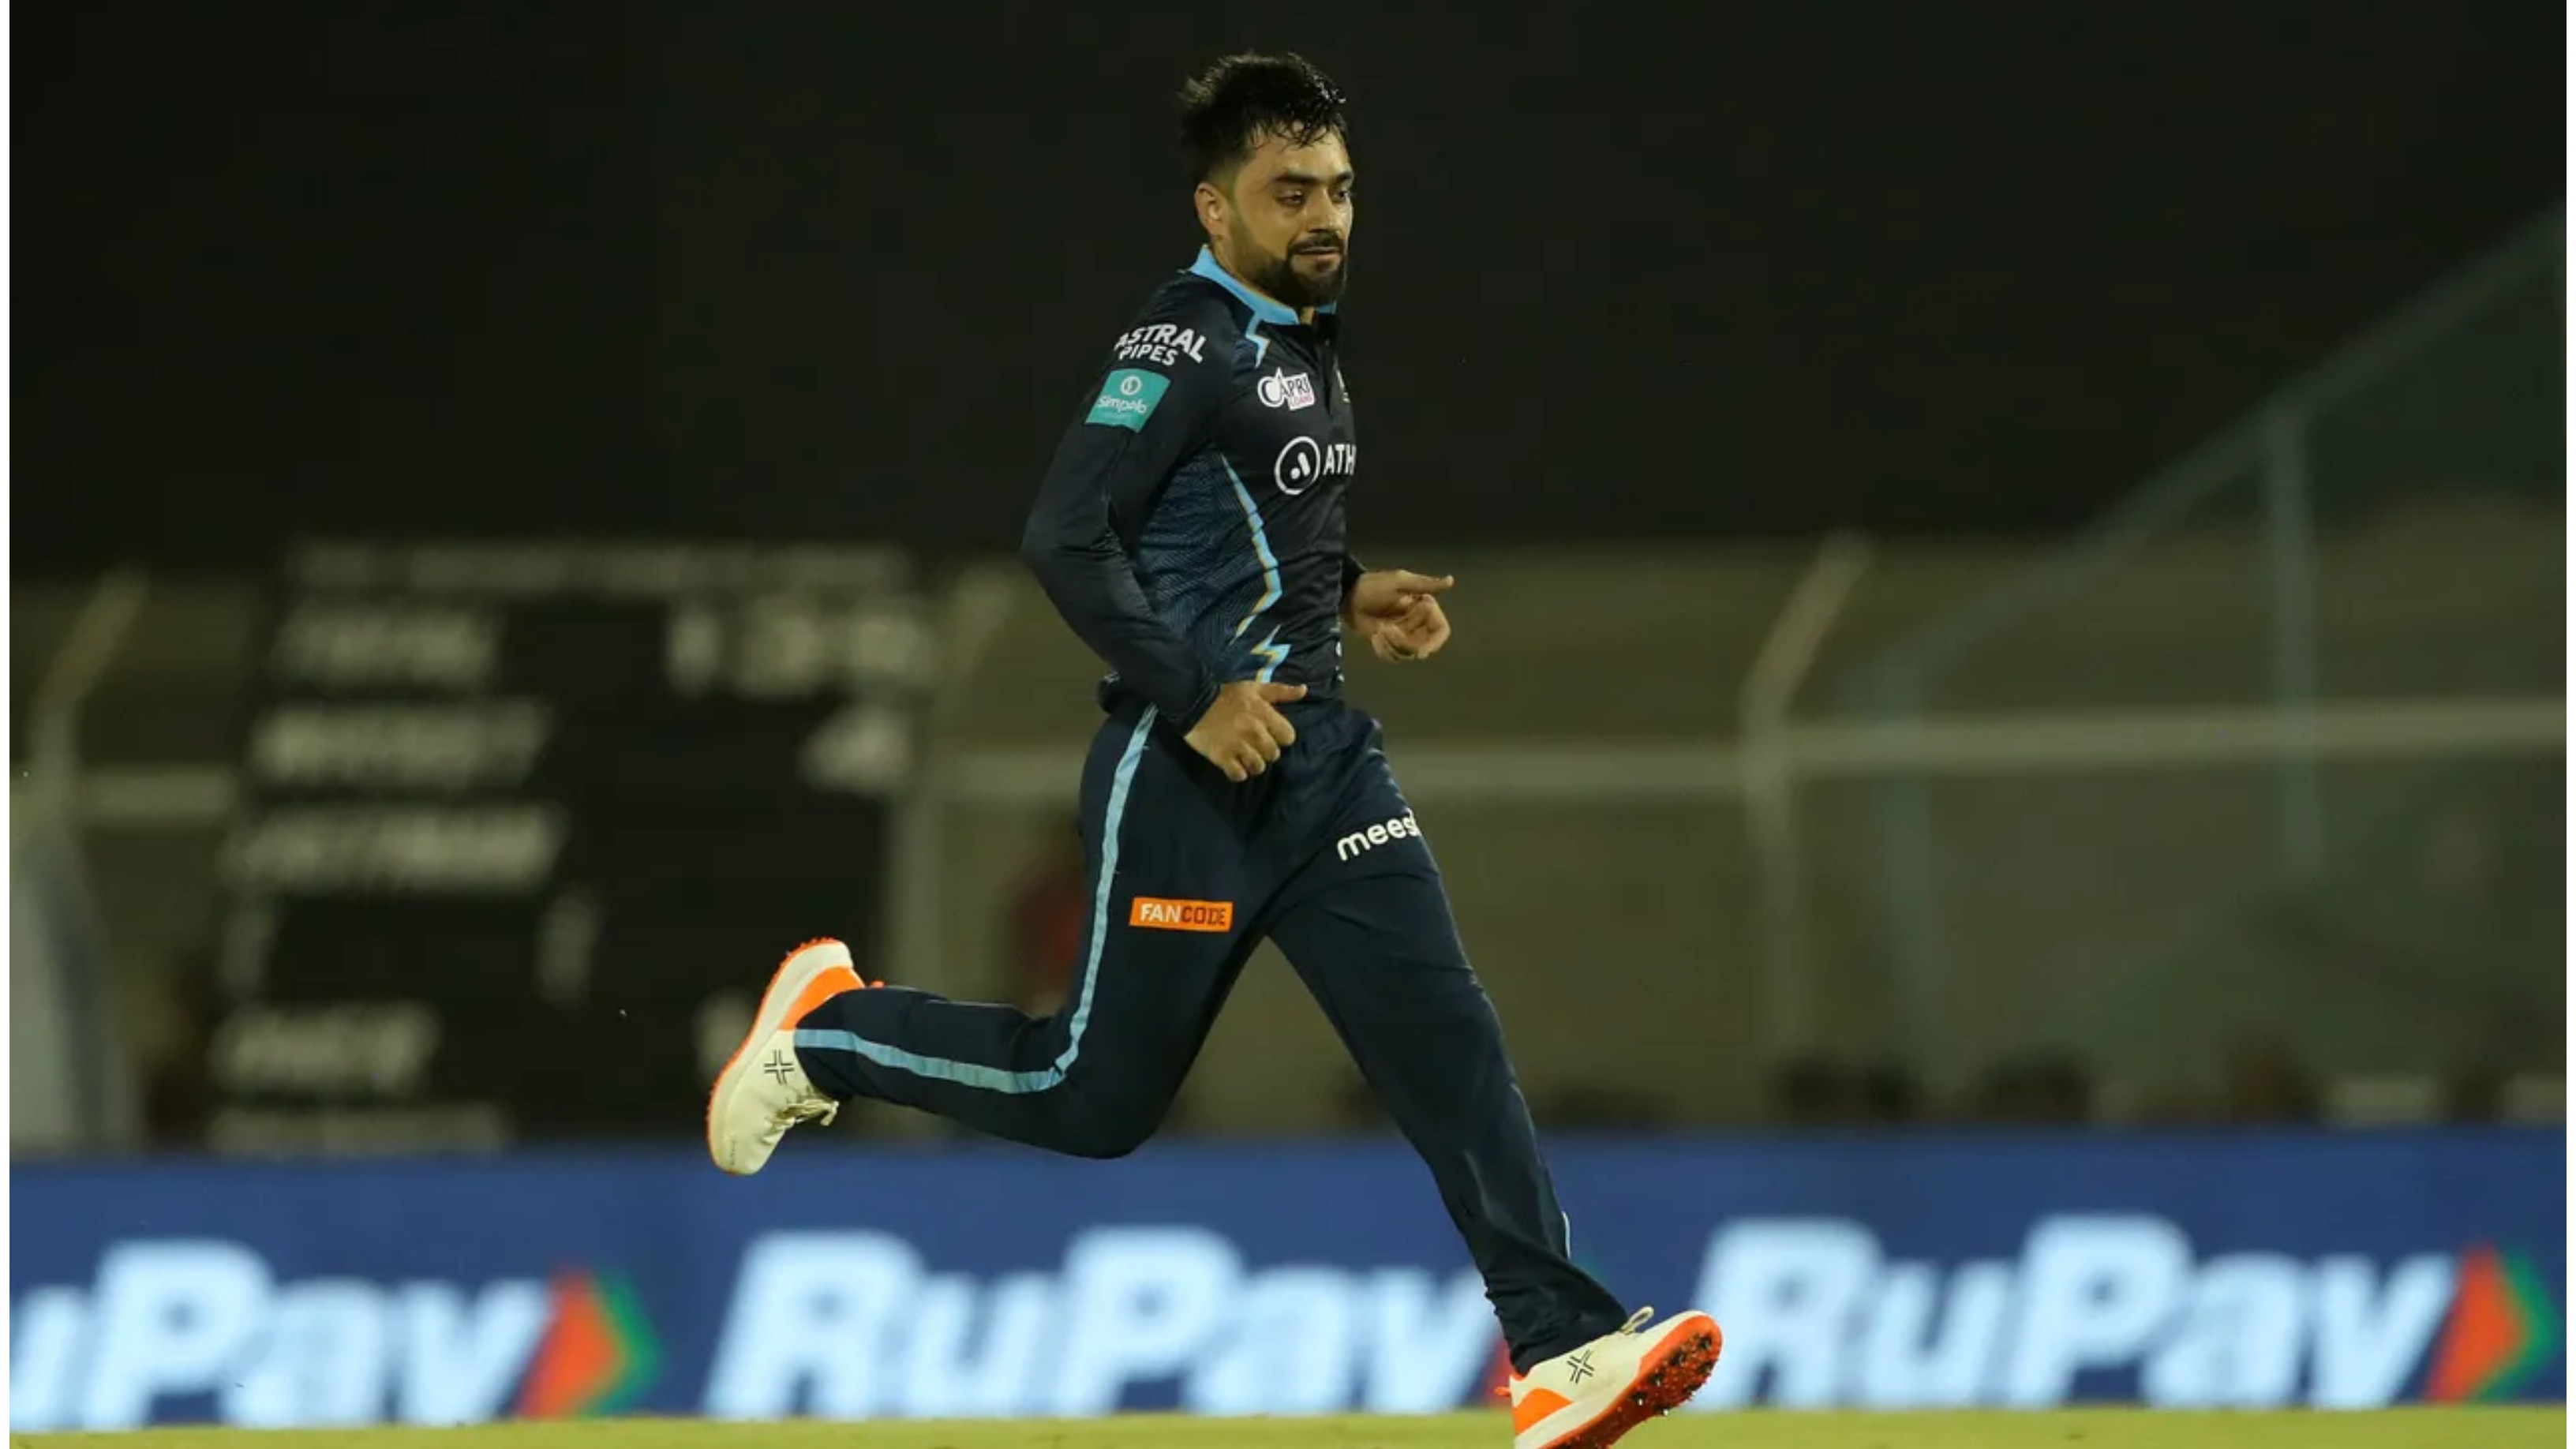 IPL 2022: ‘Teams are playing it safe against me’, Rashid Khan says his tight spells help other bowlers to take wickets